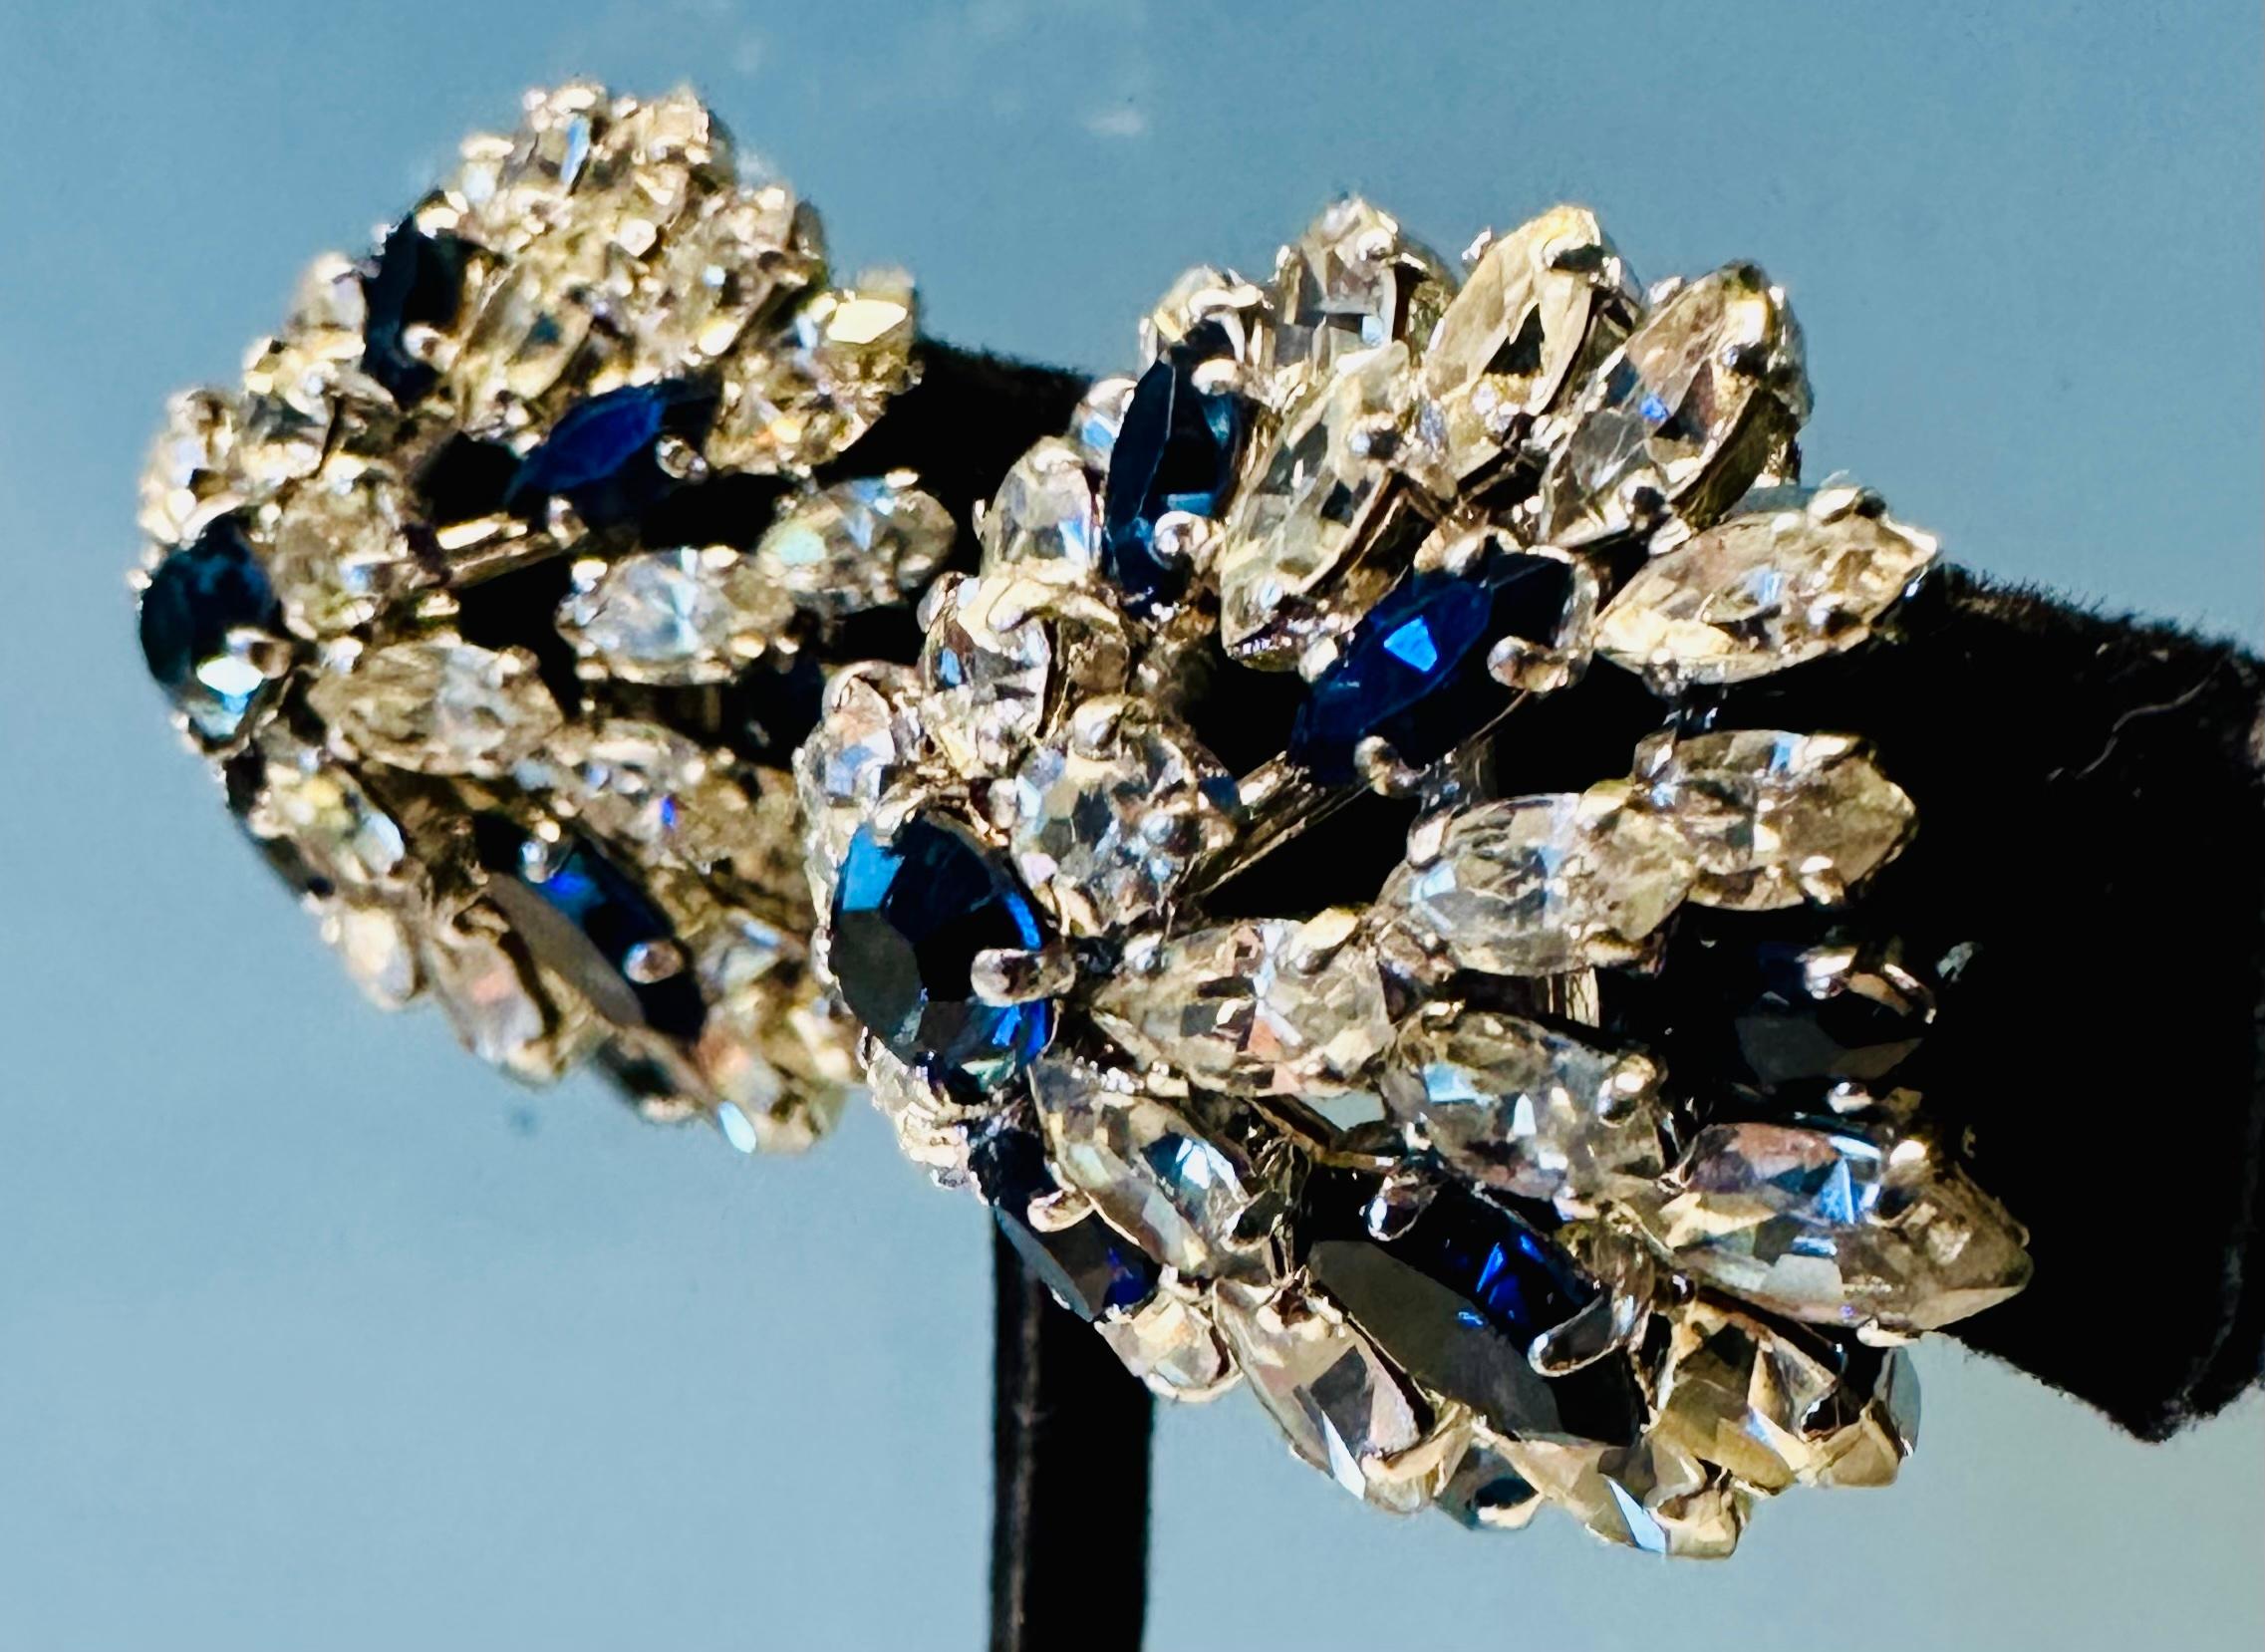 An absolutely stunning early example of a pair of 1960s Christian Dior earrings with blue and clear crystals.  The earrings are a classic example of Dior's elegant and sophisticated design and are made with a series of blue and clear crystals that